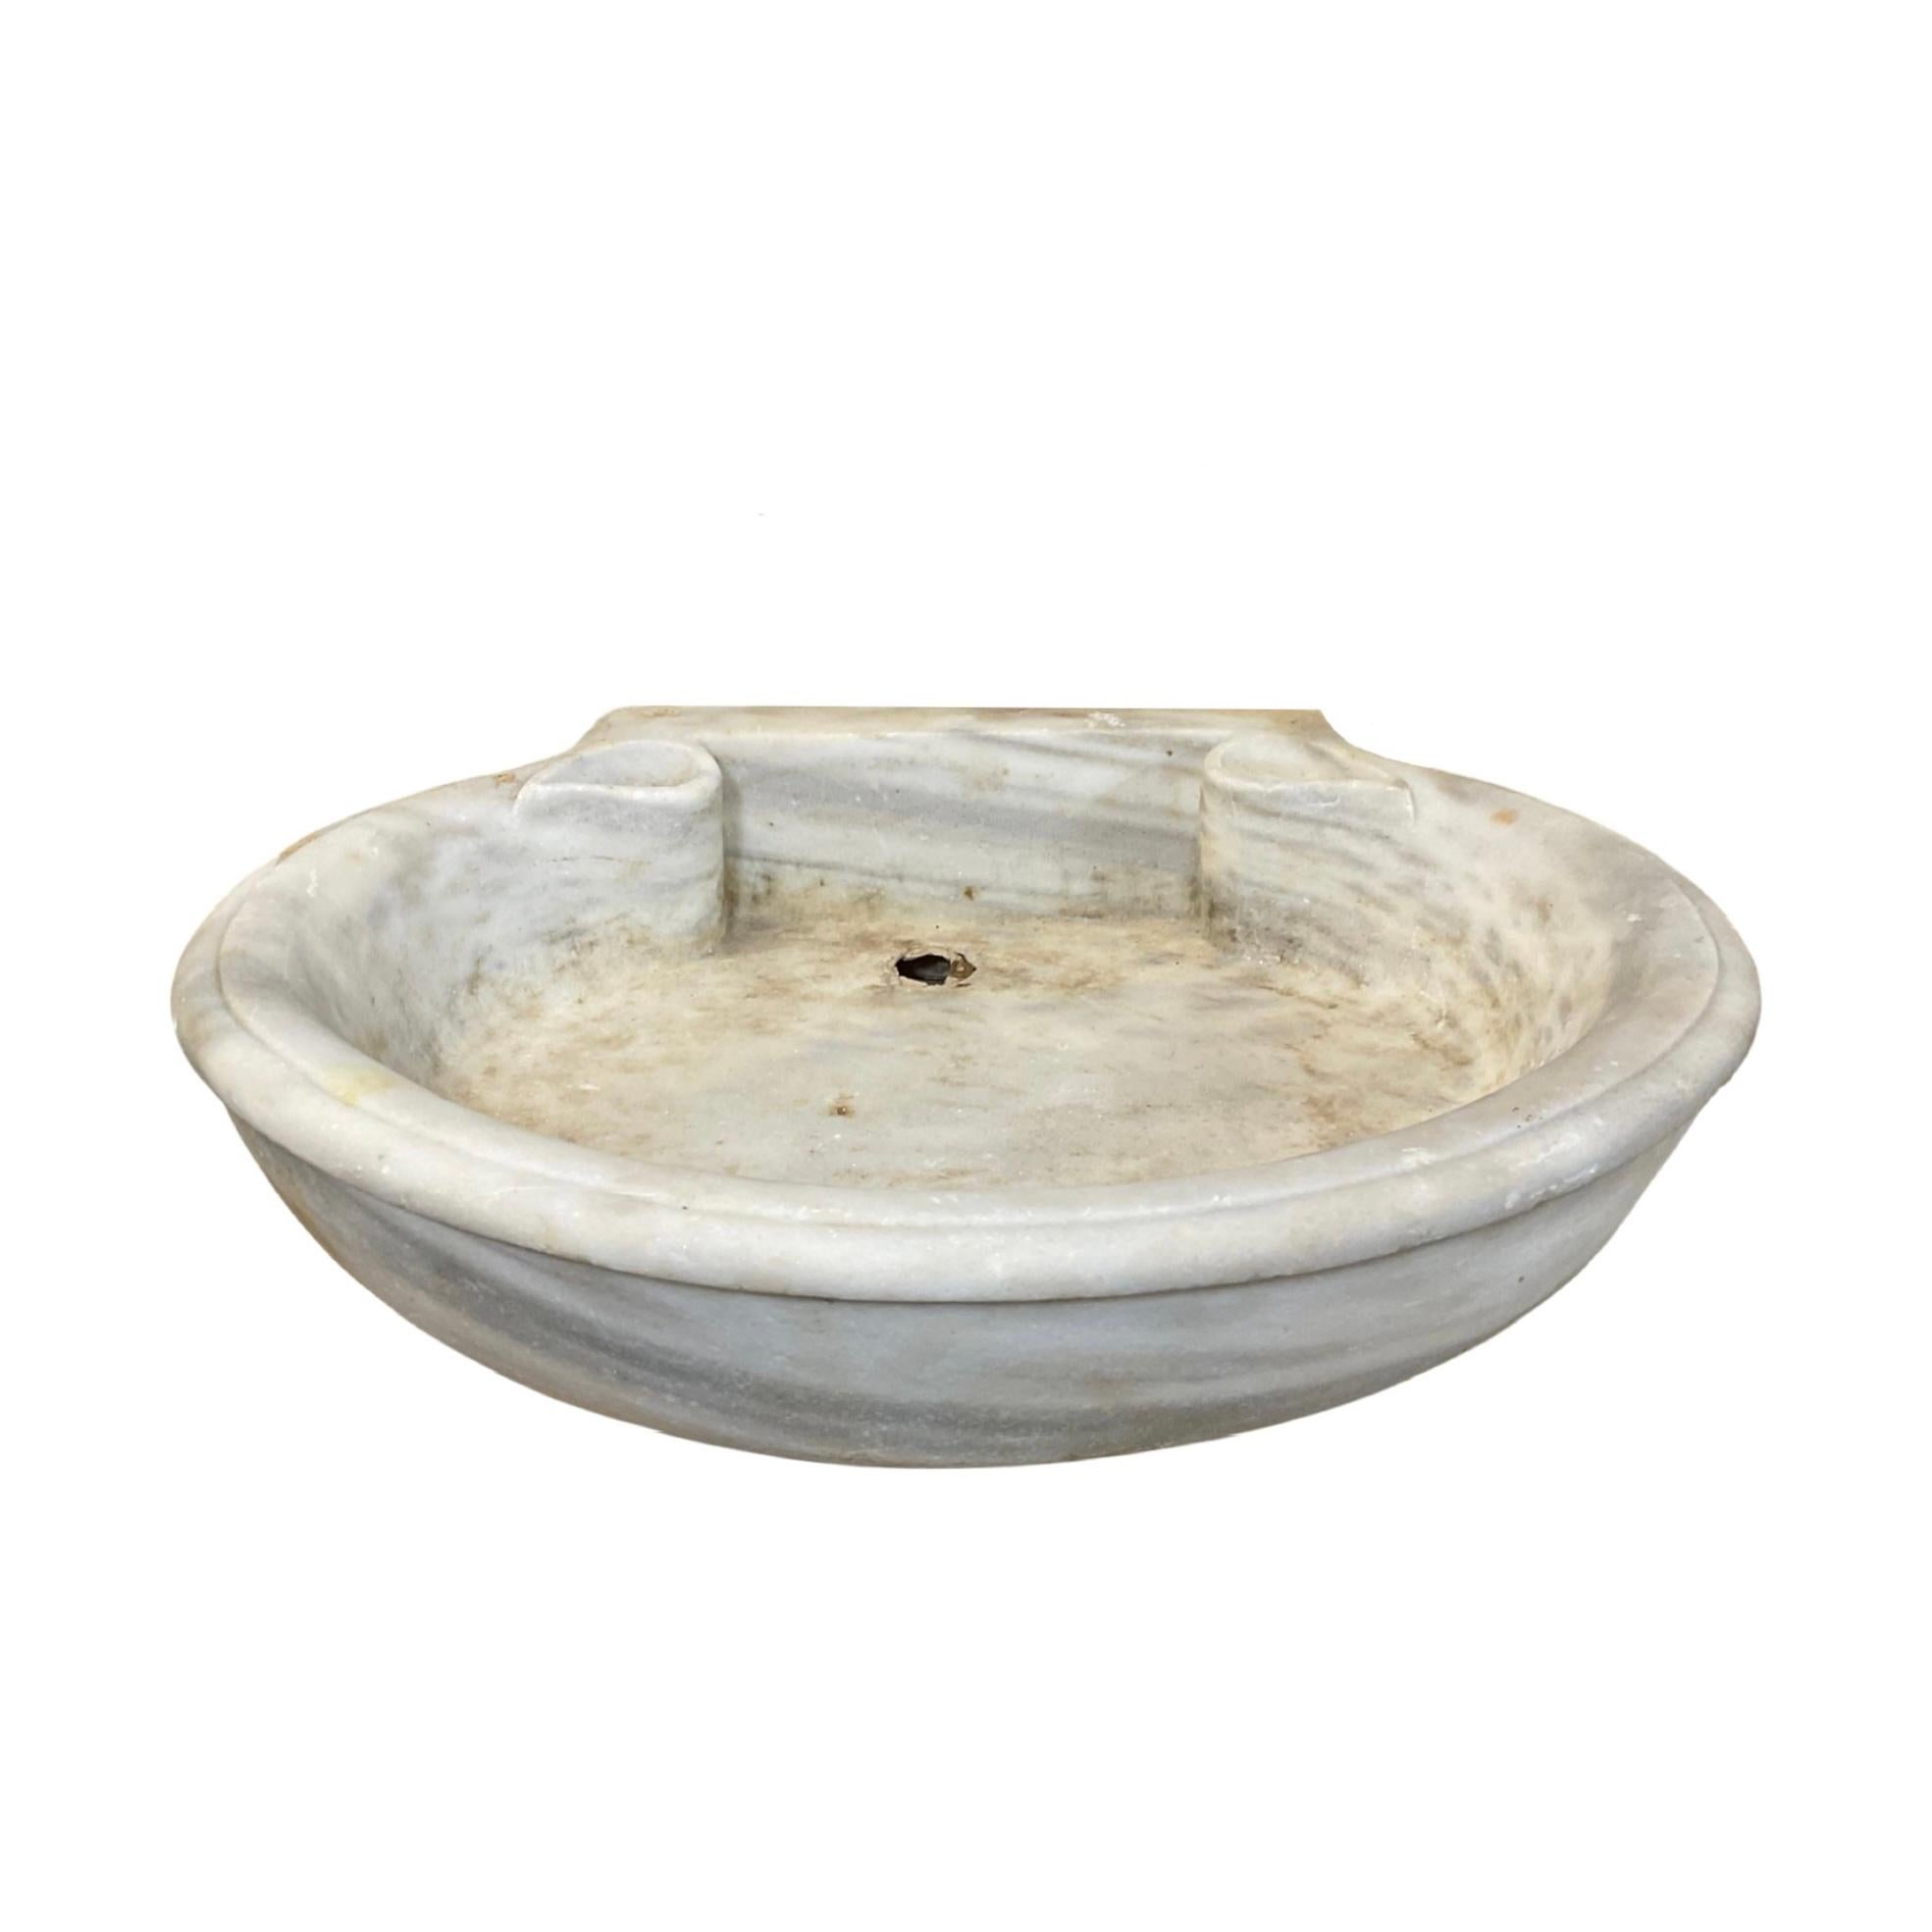 This elegant vessel sink features a deep French white marble bowl and an 18th century-inspired design. Perfect for a traditional bathroom, it’s a timeless way to give your space a luxurious look and feel. The natural stone brings a durable,